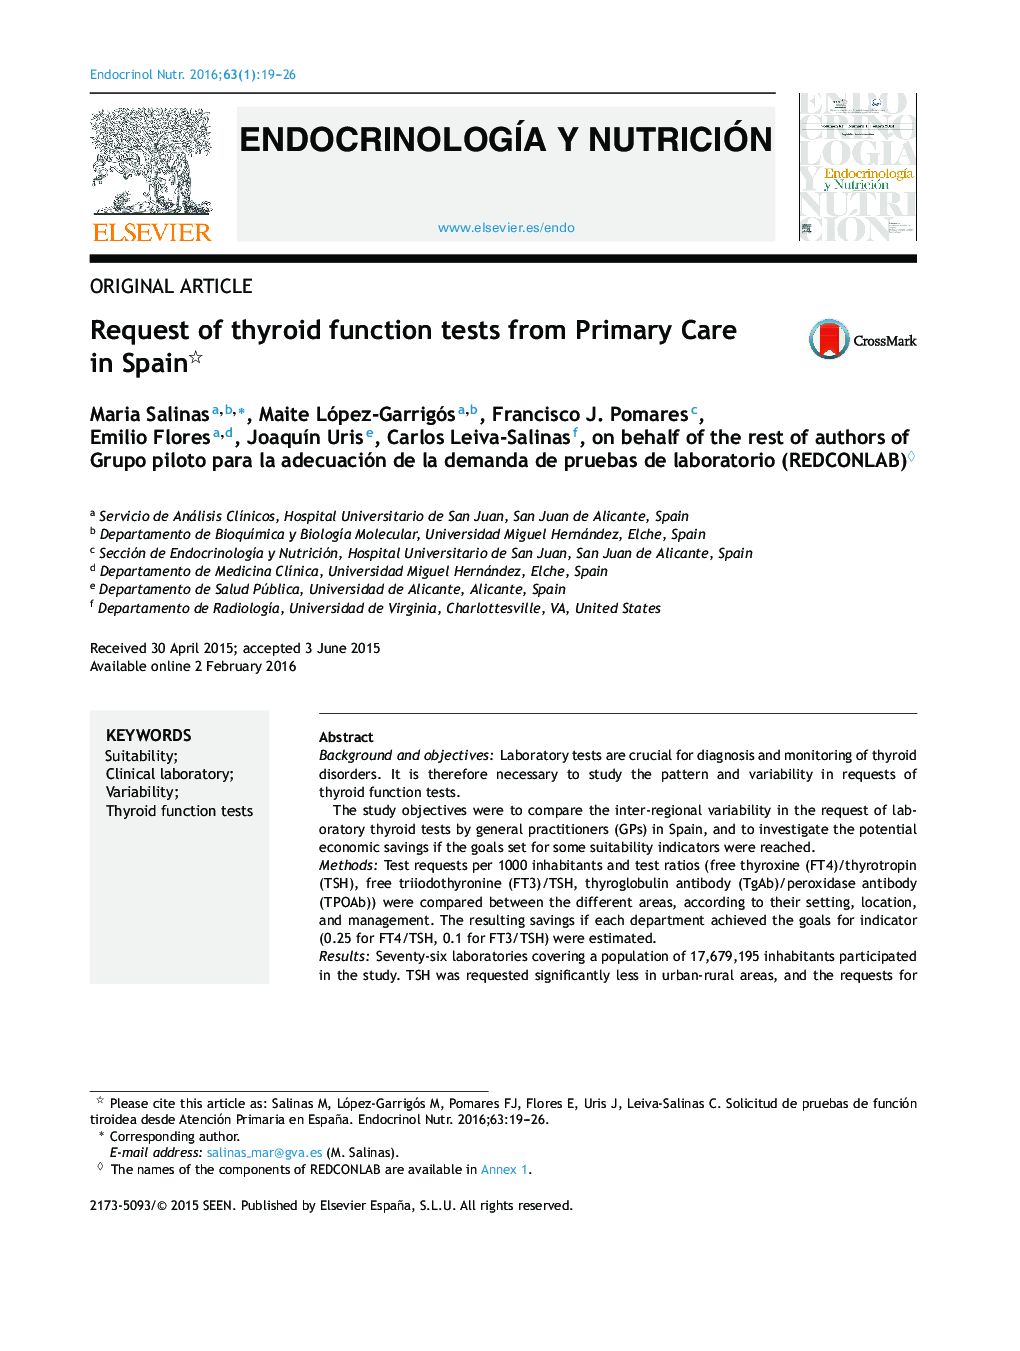 Request of thyroid function tests from Primary Care in Spain